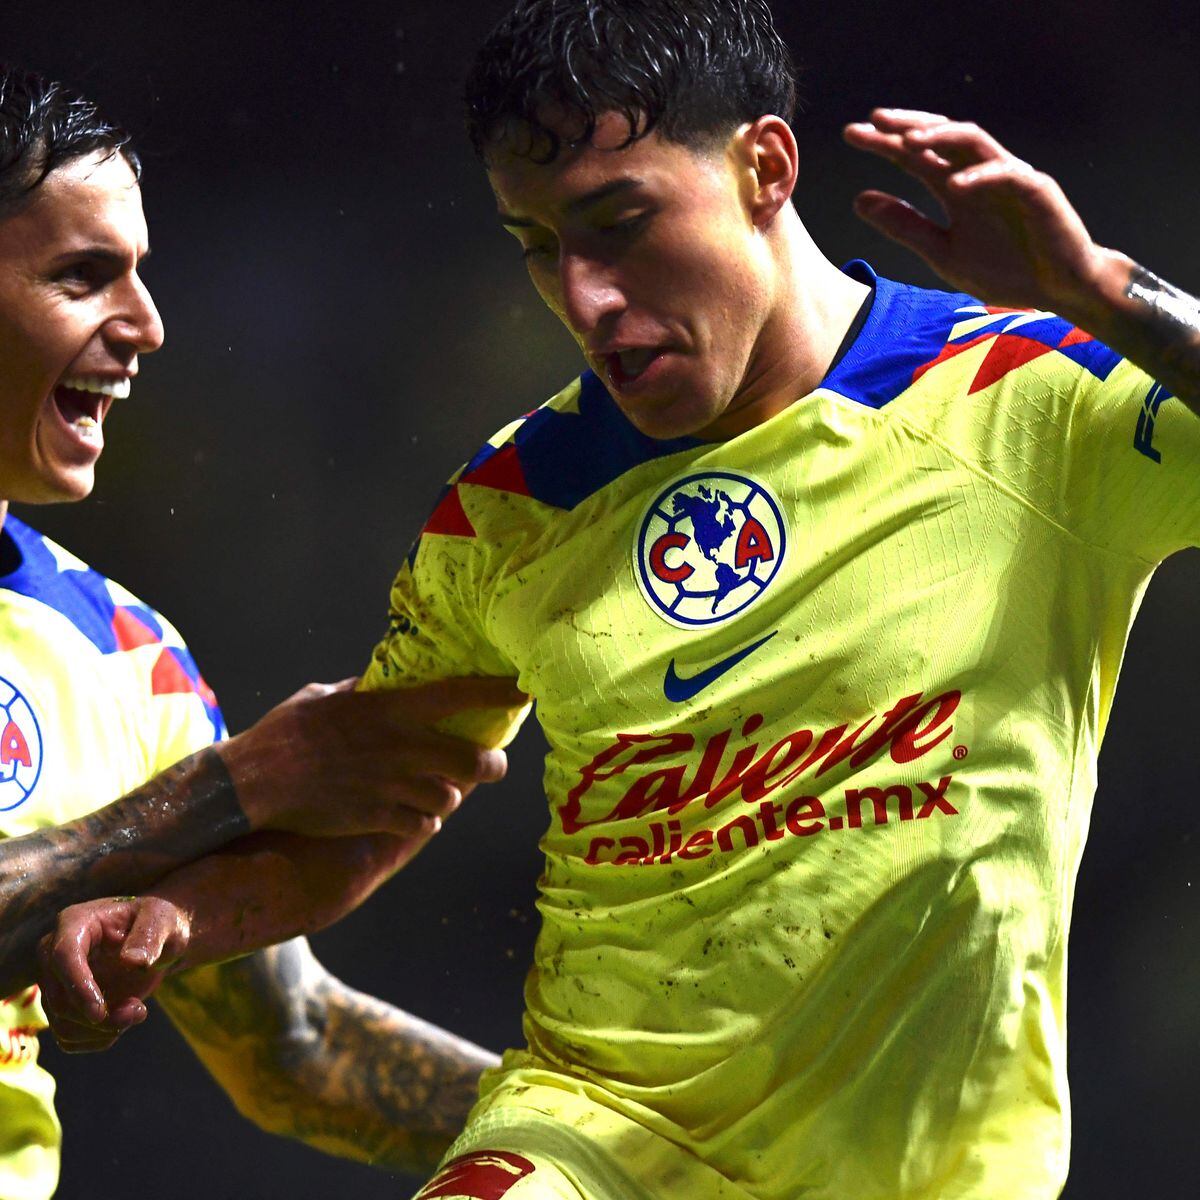 How to Watch Liga MX Streaming Live Today - September 24